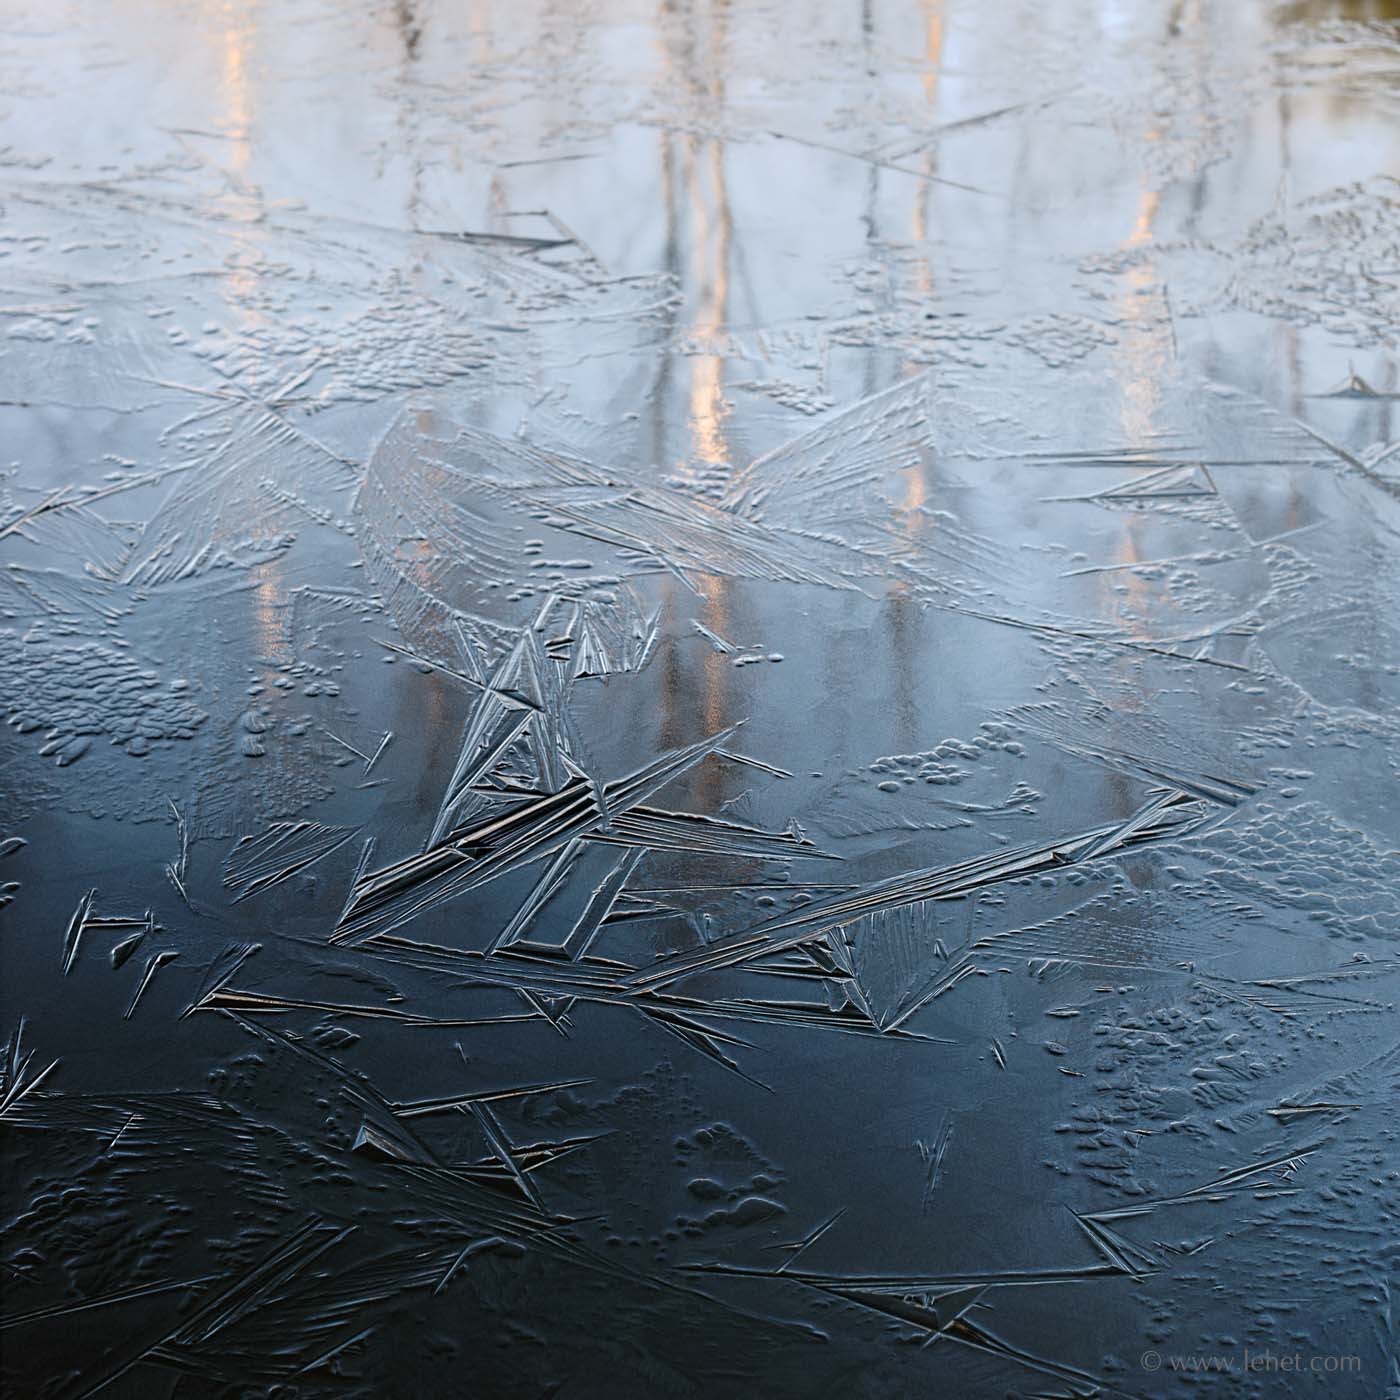 New Ice and Birch Reflections 2015, Dawn